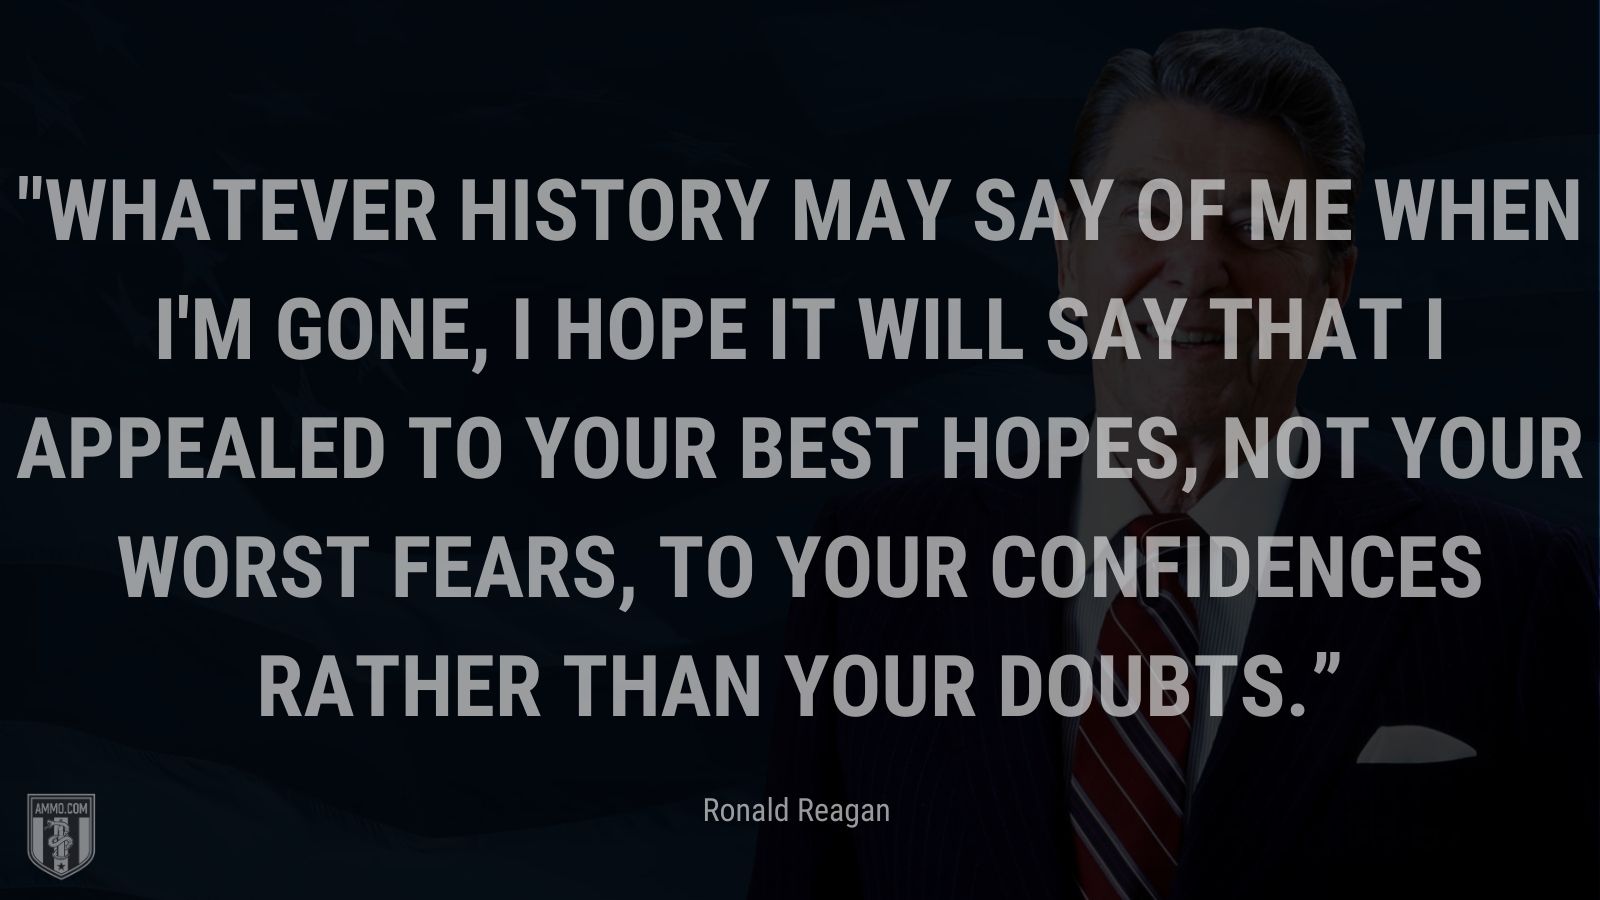 “Whatever history may say of me when I'm gone, I hope it will say that I appealed to your best hopes, not your worst fears, to your confidences rather than your doubts.” - Ronald Reagan